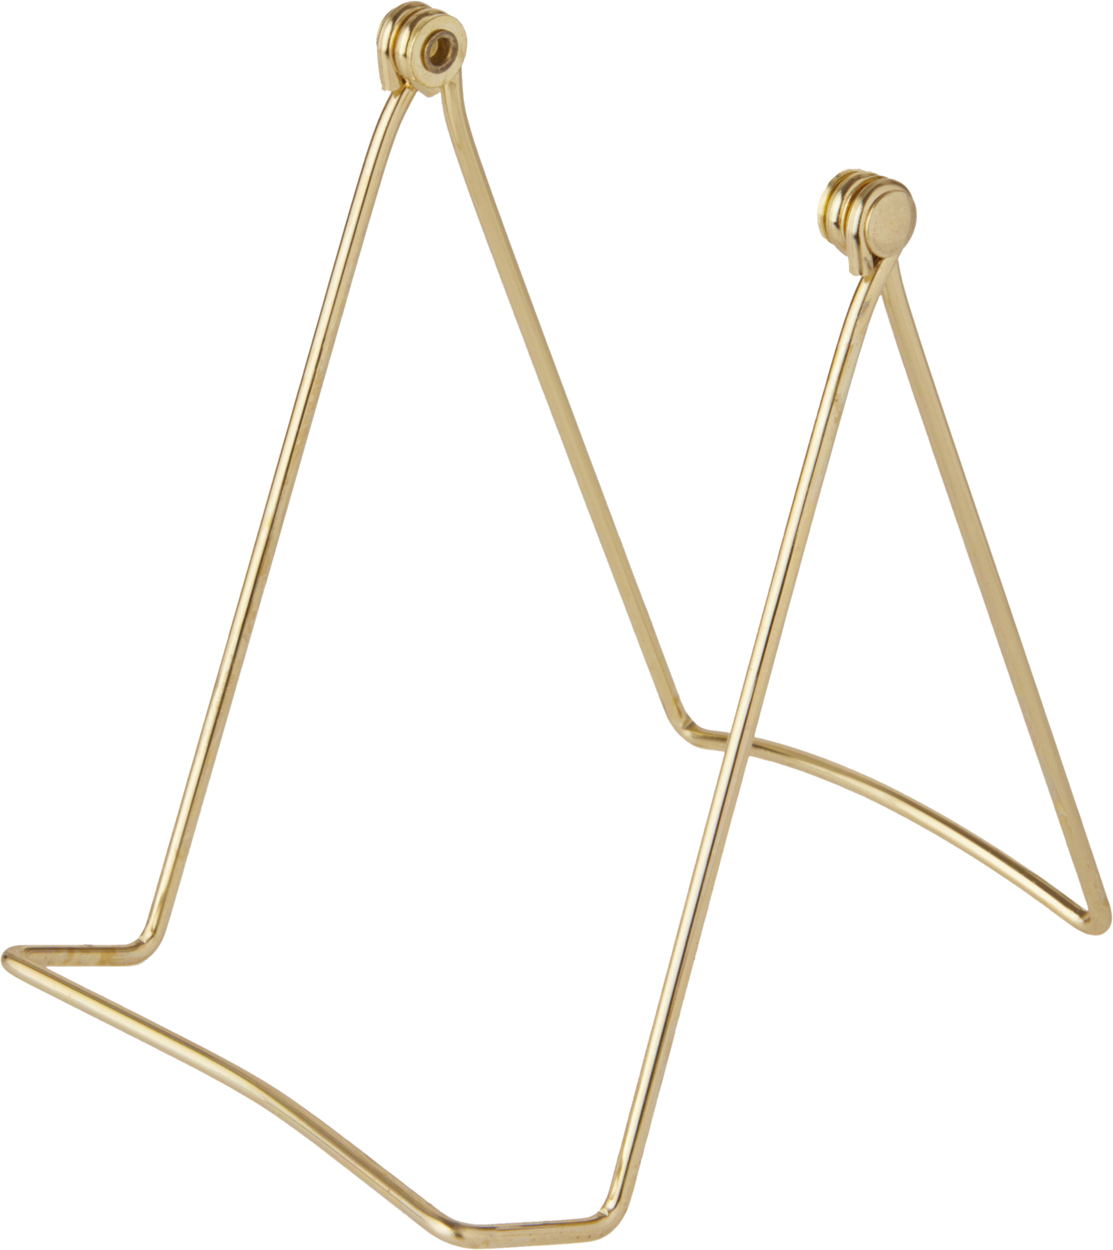 Bard's Folding Gold Wire Easel Stand, 6" H x 4.25" W x 6.25" D